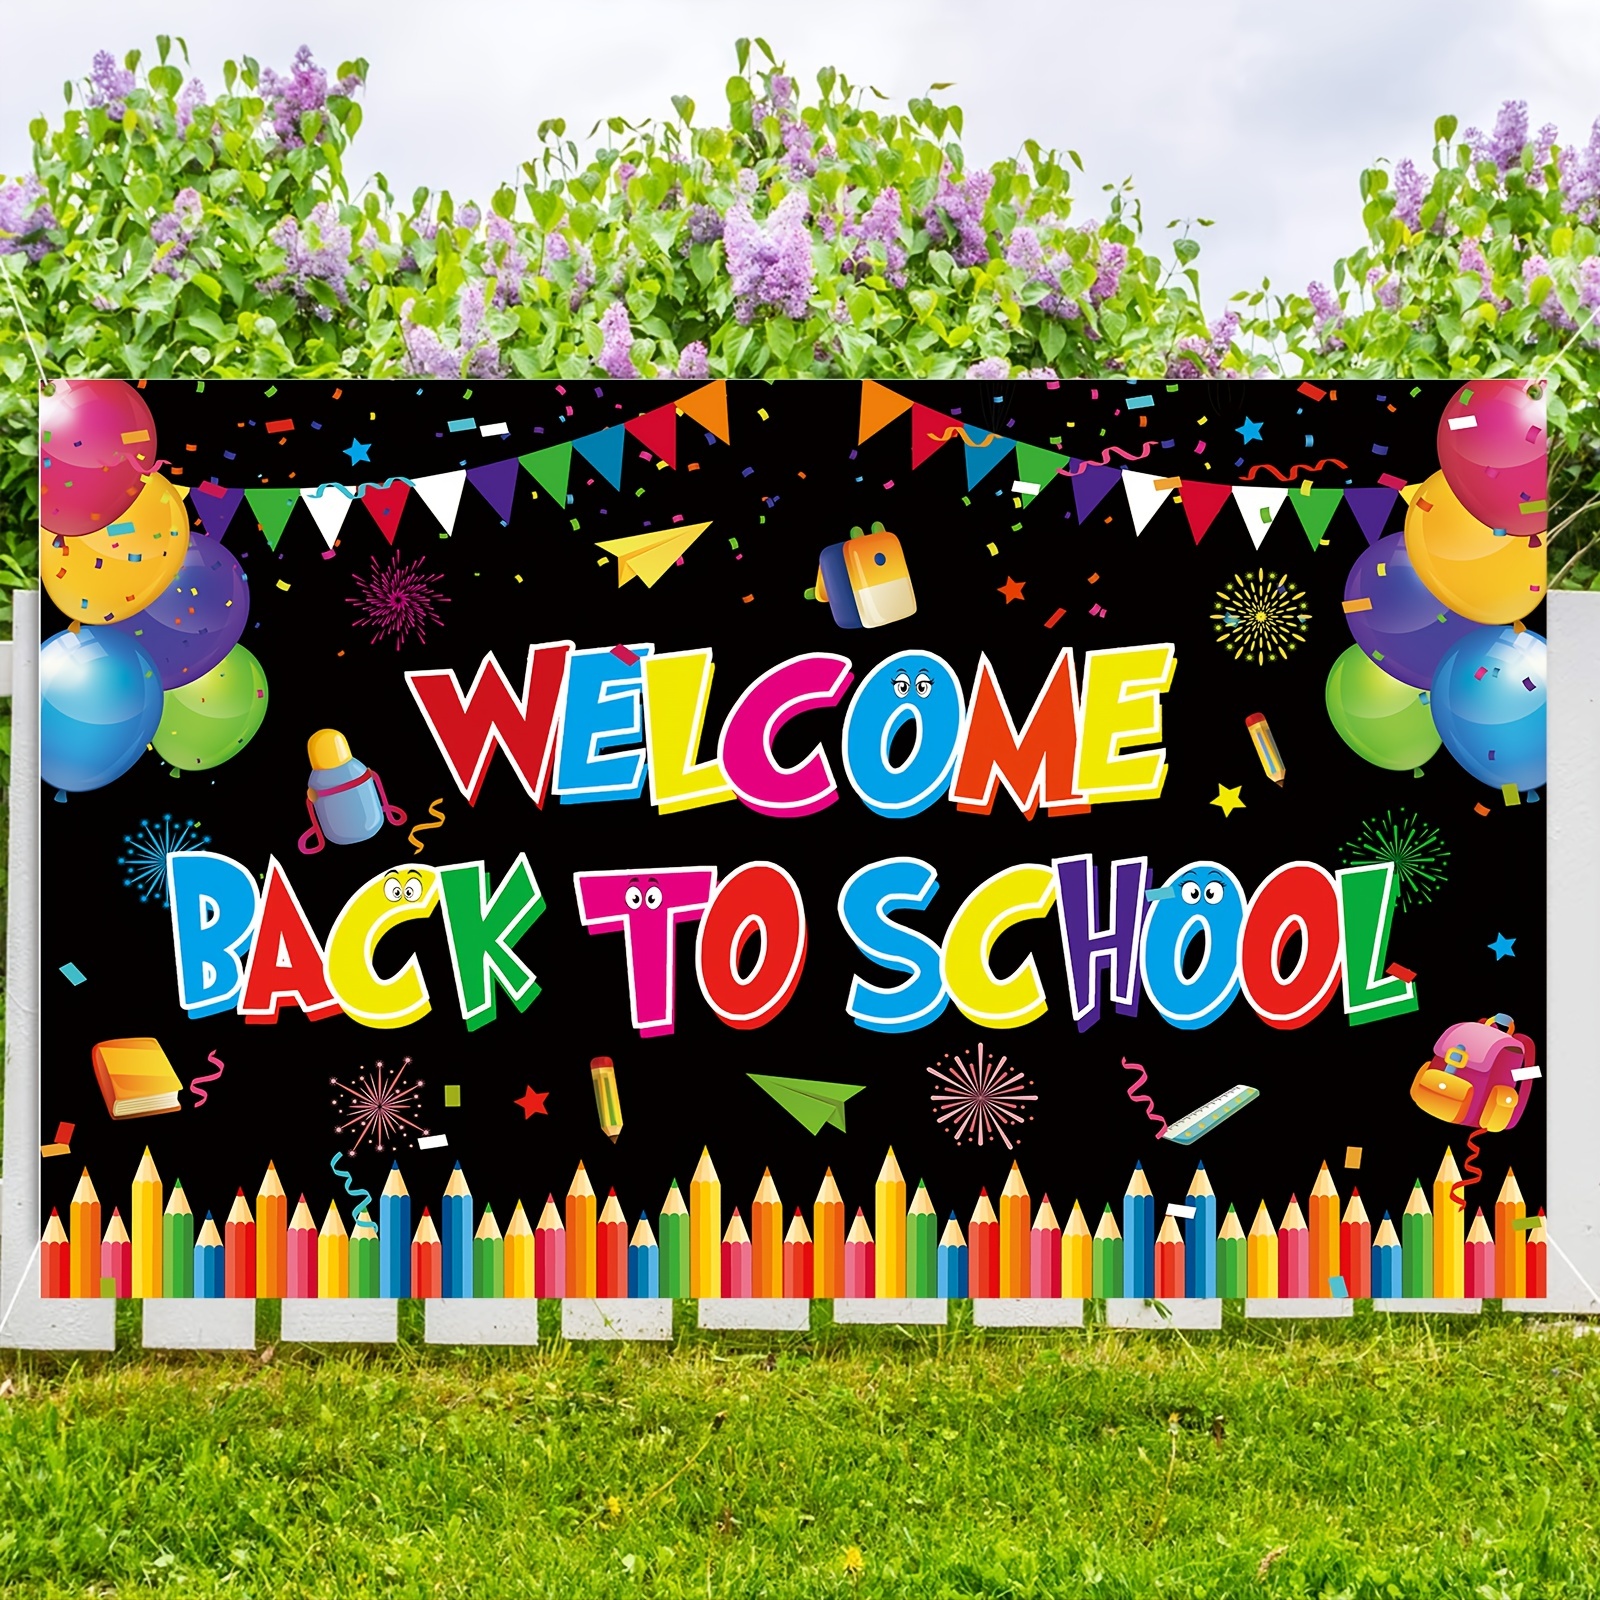 5x3FT Welcome Back to School Banner First Day of School Backdrop Banner Teachers and Students Party Supplies Classroom Office School Photo Back - 2